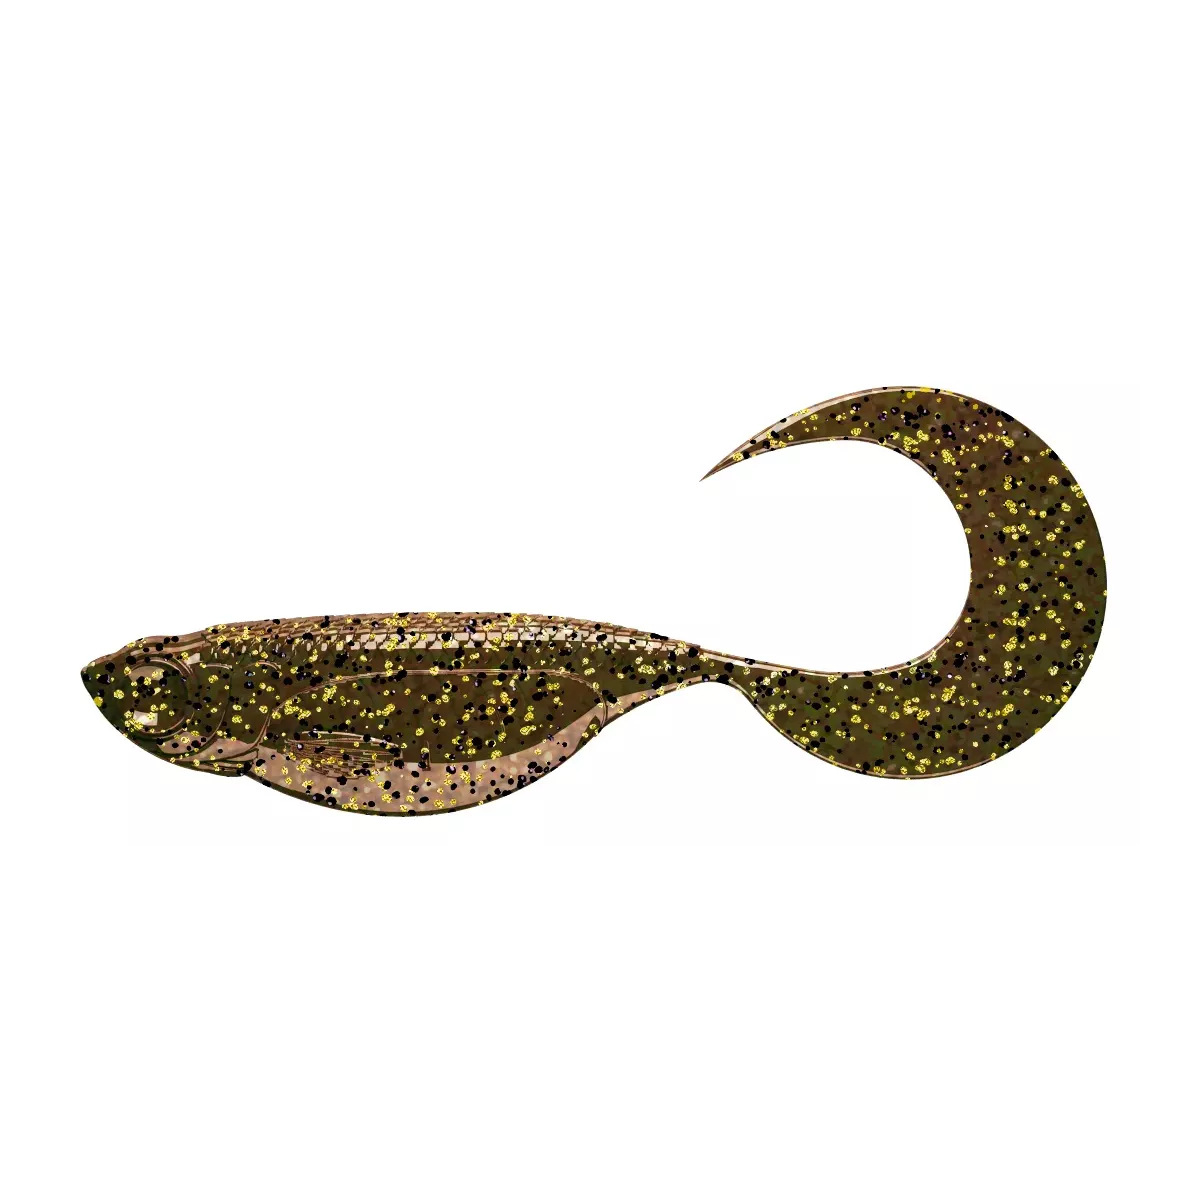 Libra Lures Embrion Twist Tail 1.75'' 4.5cm - 033 / MOTOR OIL BROWN